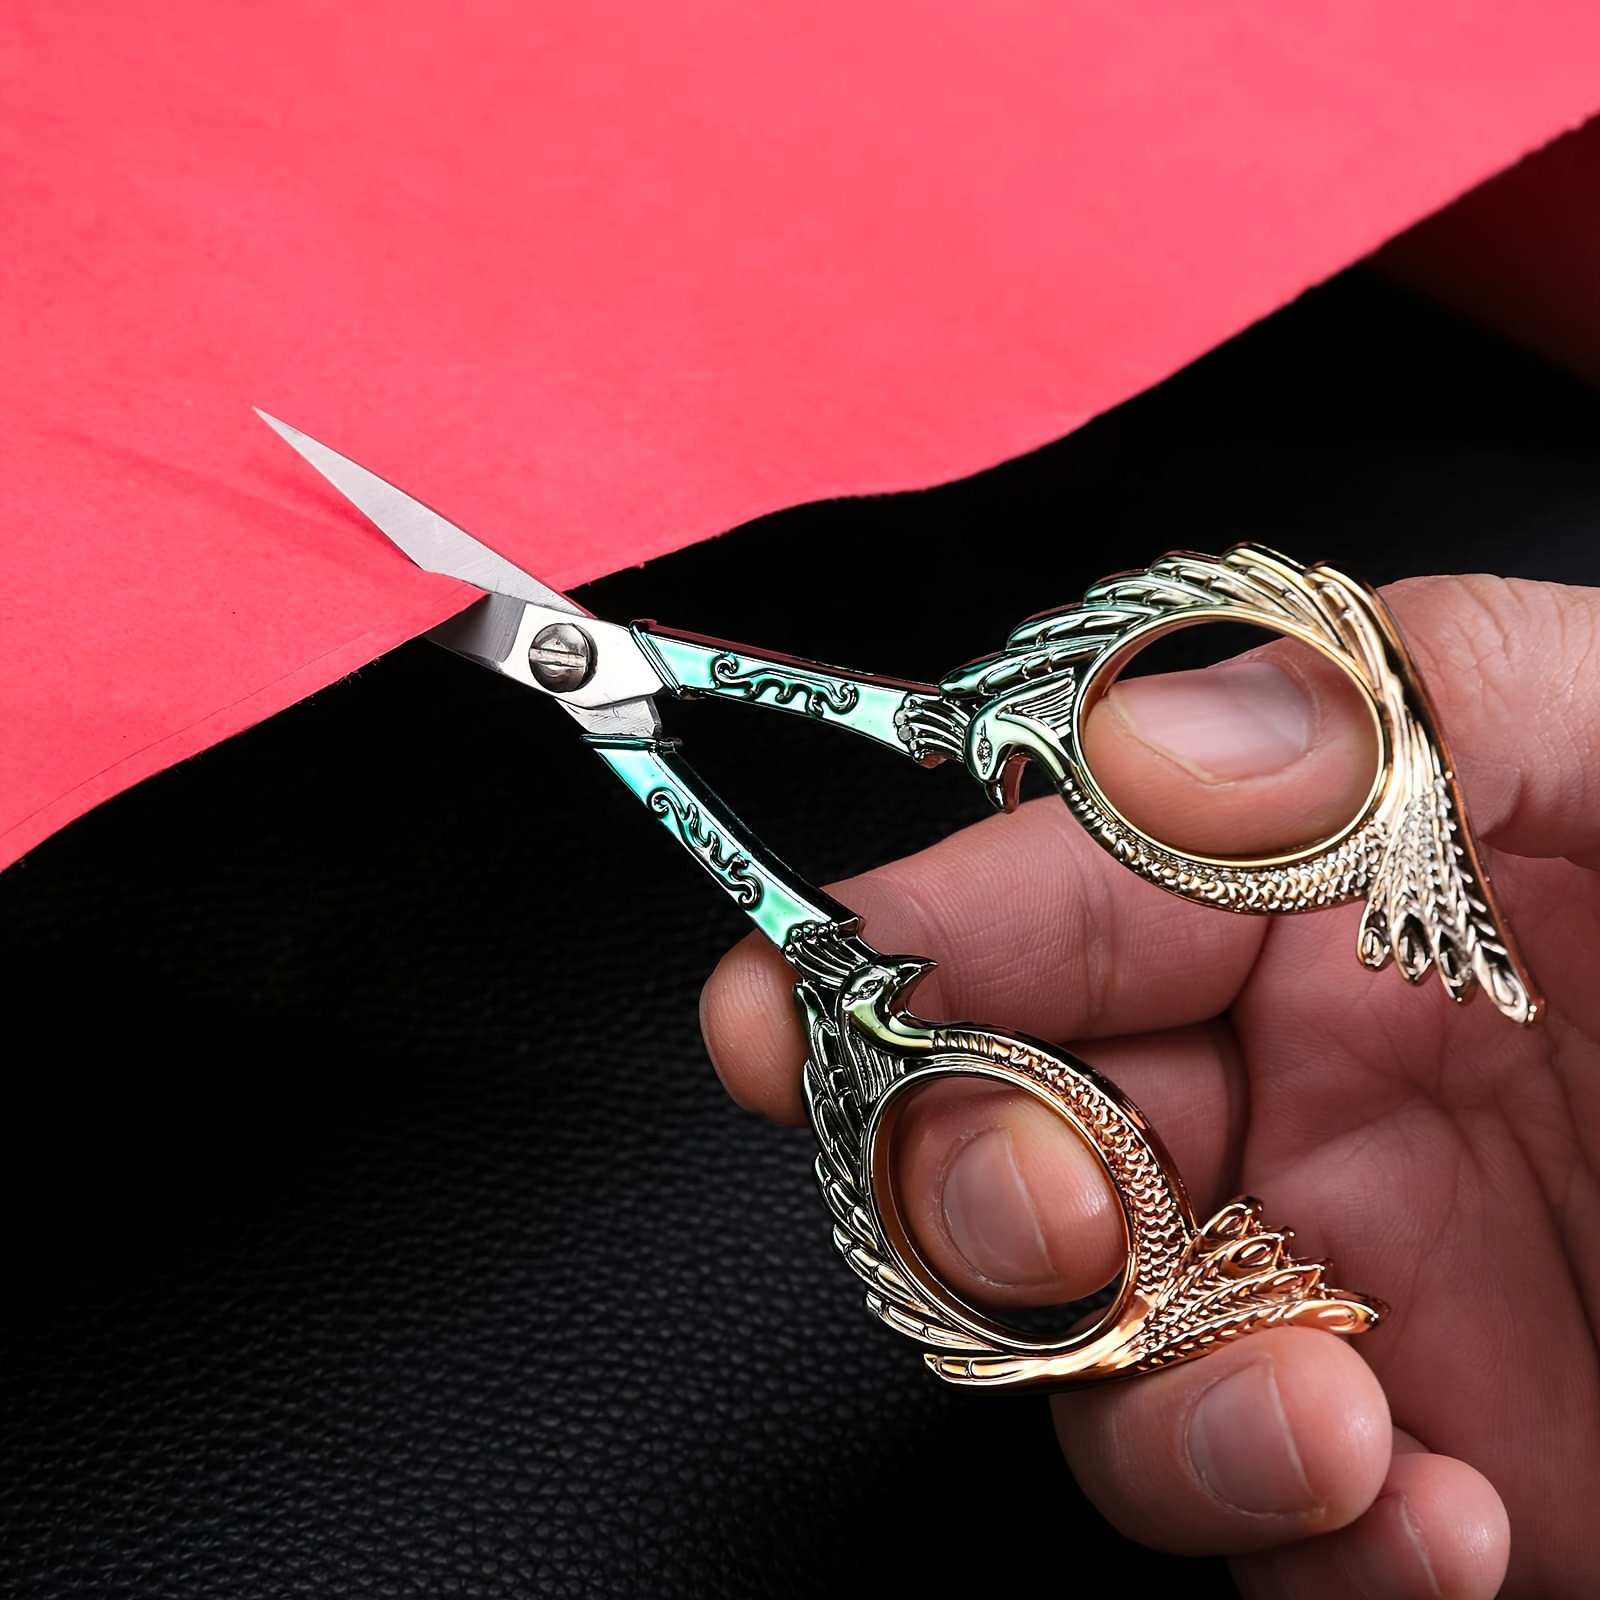 Vintage Embroidery Sharp Scissors 2 Pack, 5 Inches Craft Sewing Scissor  Pointed Stainless Steel Multipurpose Detail Beauty Shears for Office Home